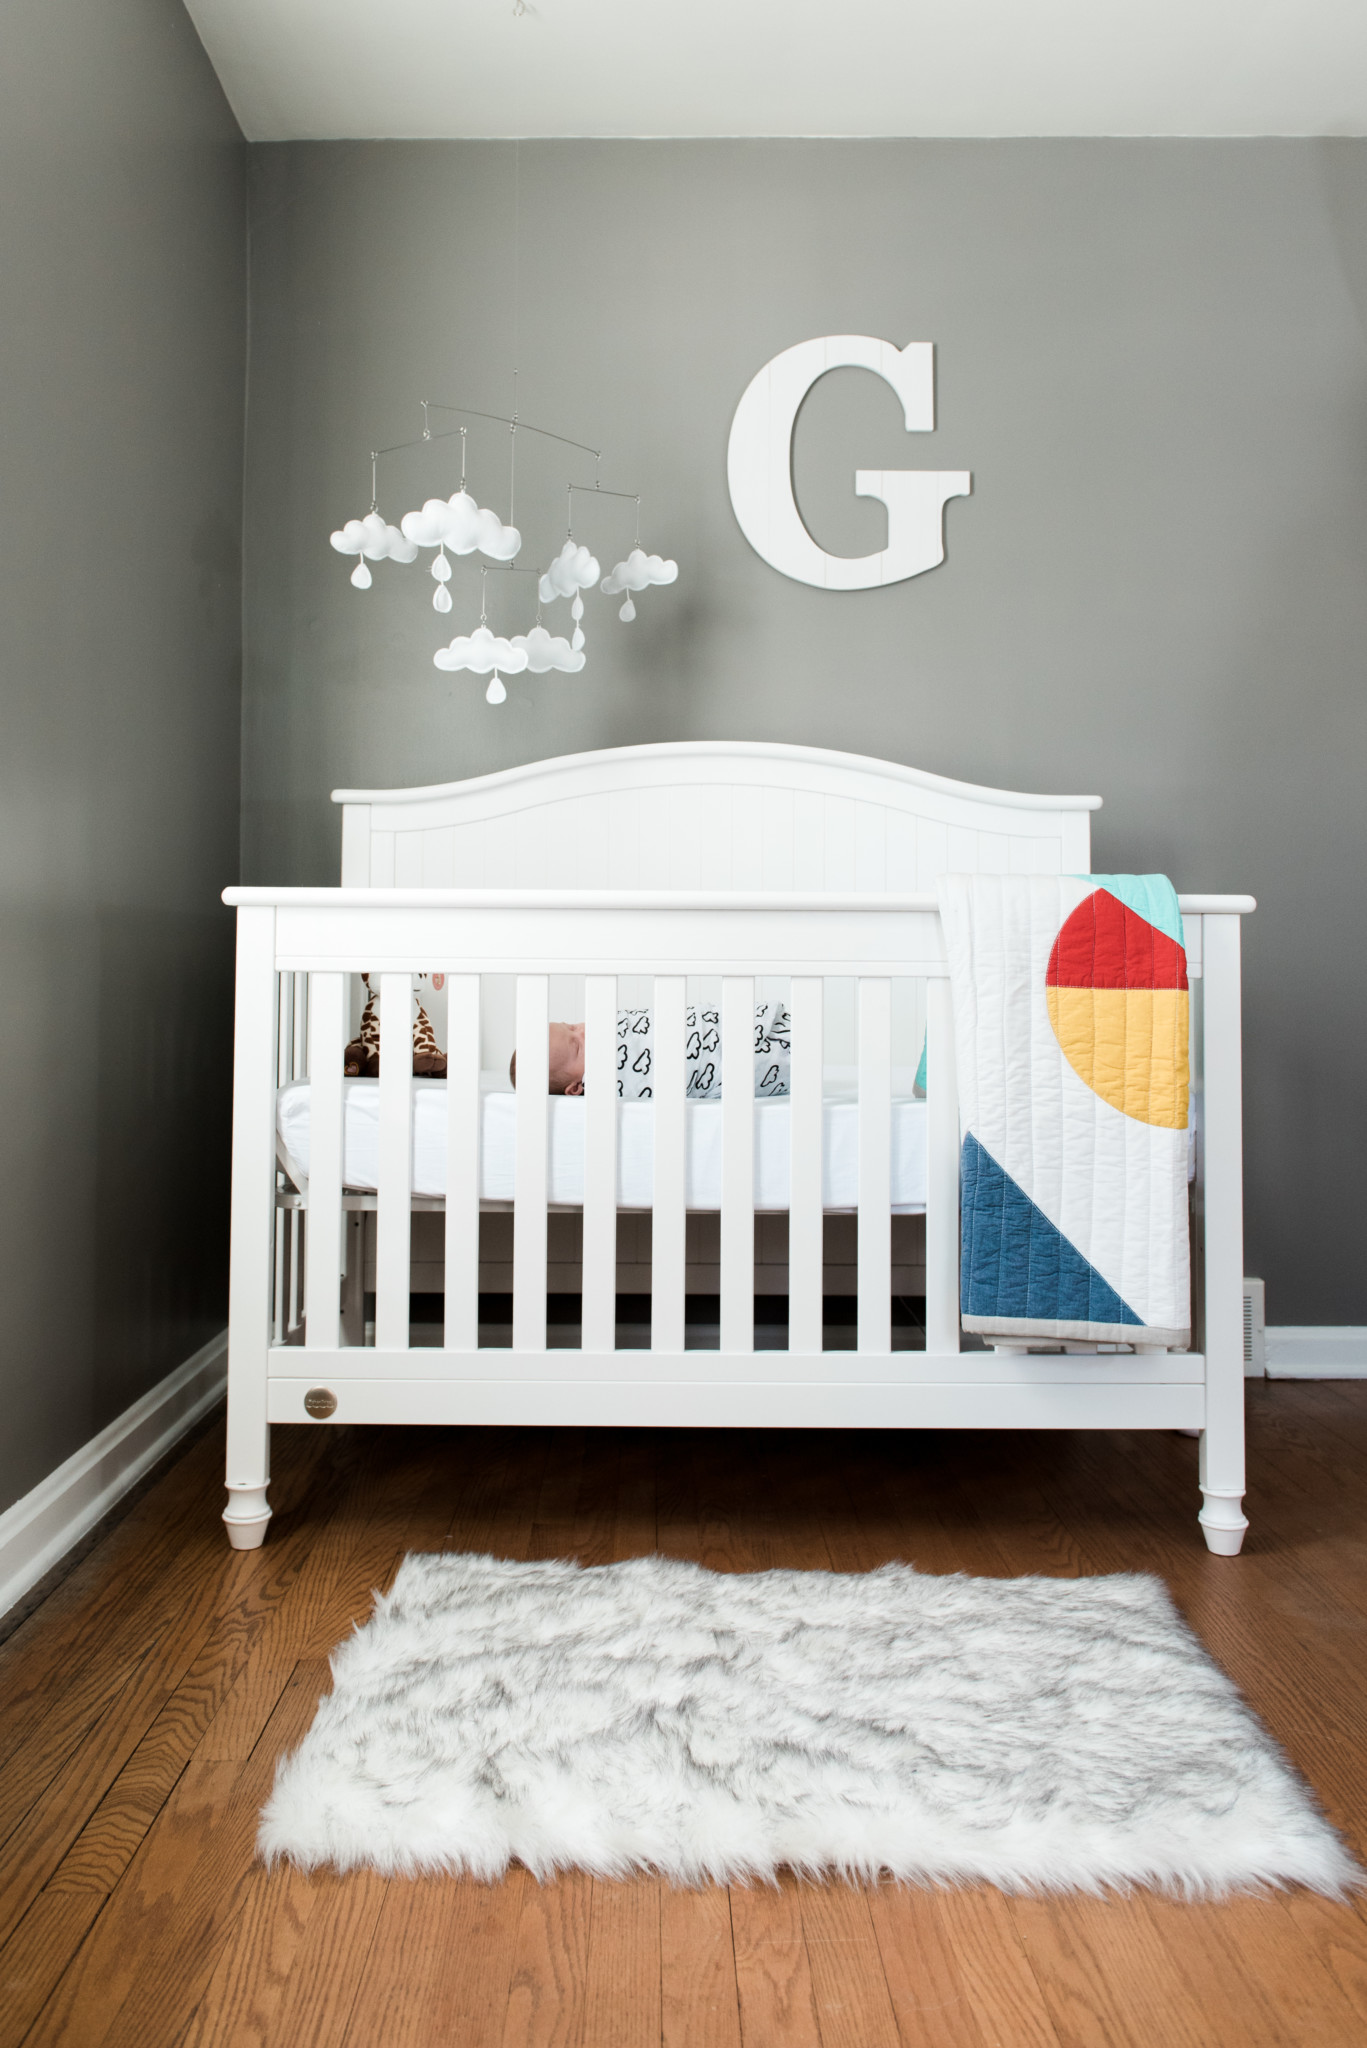 Baby boy wrapped in a white swaddle lays sleeping in his white crib. Above the crib on the wall is a large letter G and a cloud mobile. On the floor lays a white fur rug and on the crib hangs a colorful quilt for this in home newborn lifestyle photography session in Pittsburgh, PA